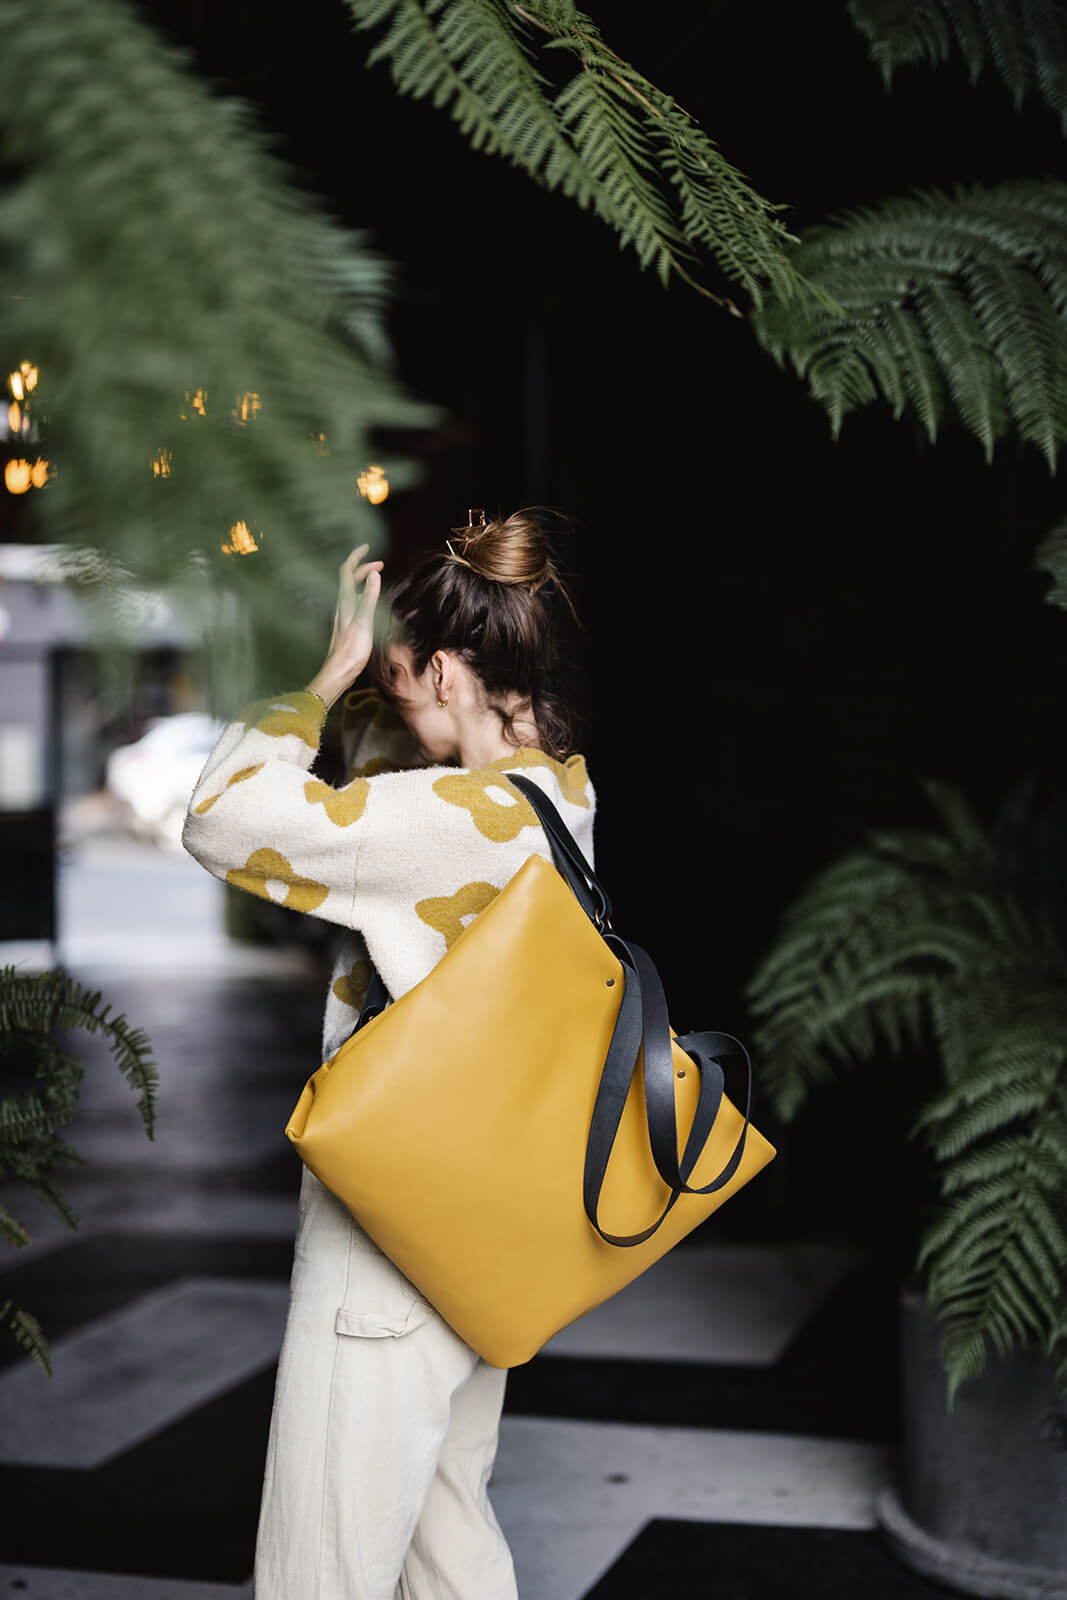 Woman standing amongst green ferns with dark background. Her hand is to her head in a modelling pose, Her clothes are beige and yellow and she is modelling a yellow leather backpack and tote as a backpack on her left shoulder. The straps are black leather